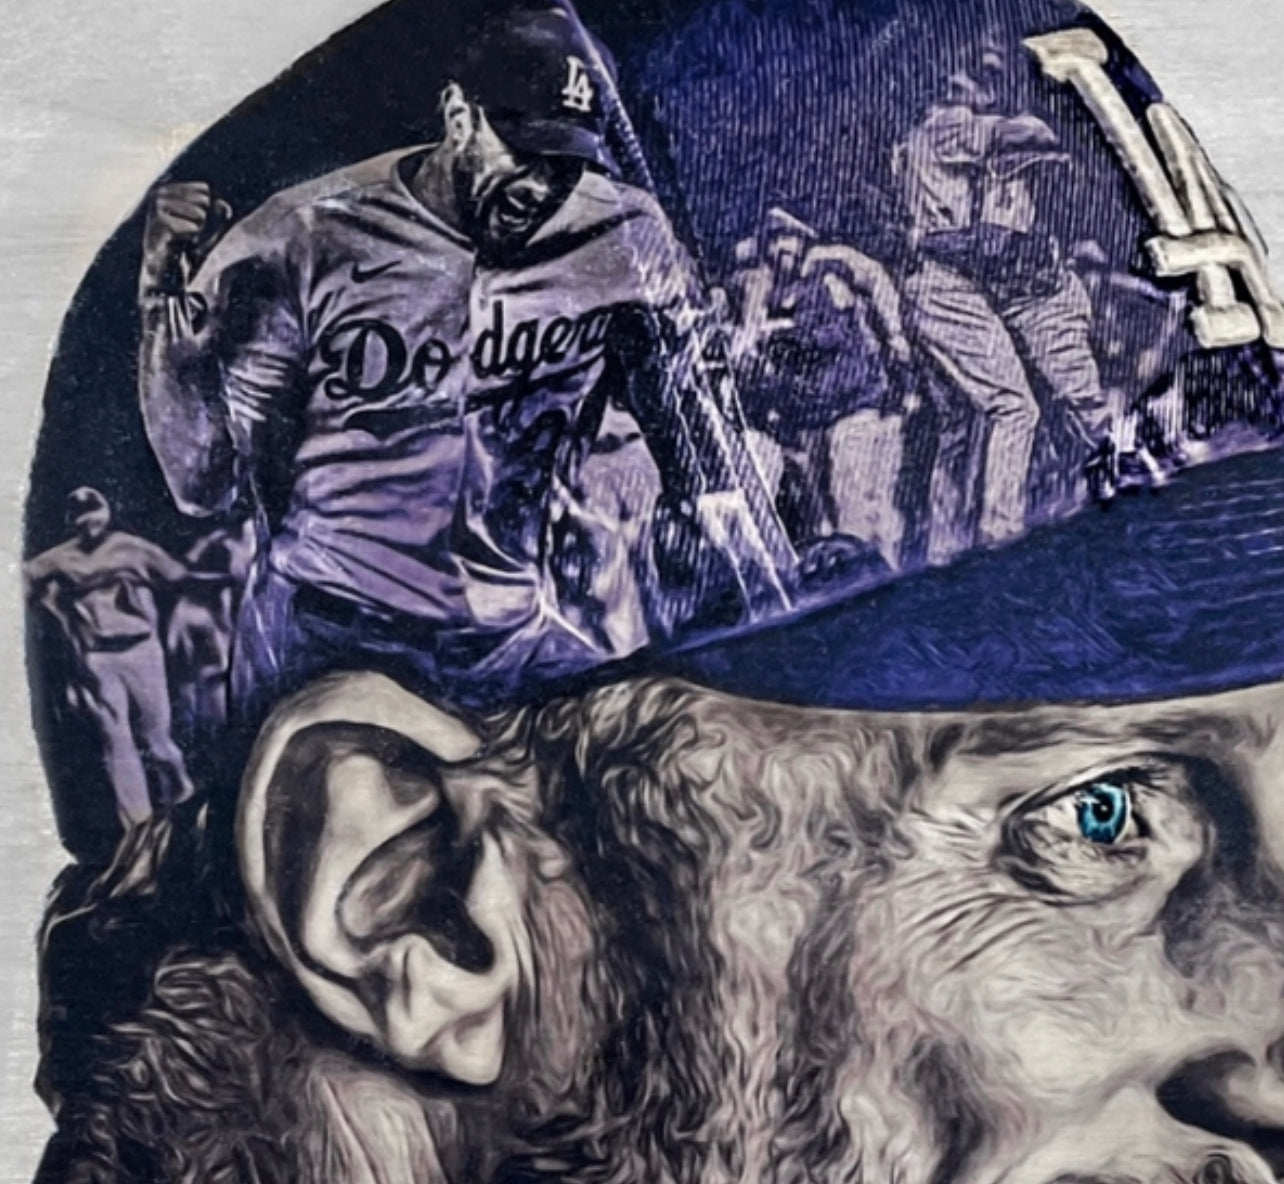 "MAX Energy" (Max Scherzer) Los Angeles Dodgers - Officially Licensed MLB Print - Limited Release /500